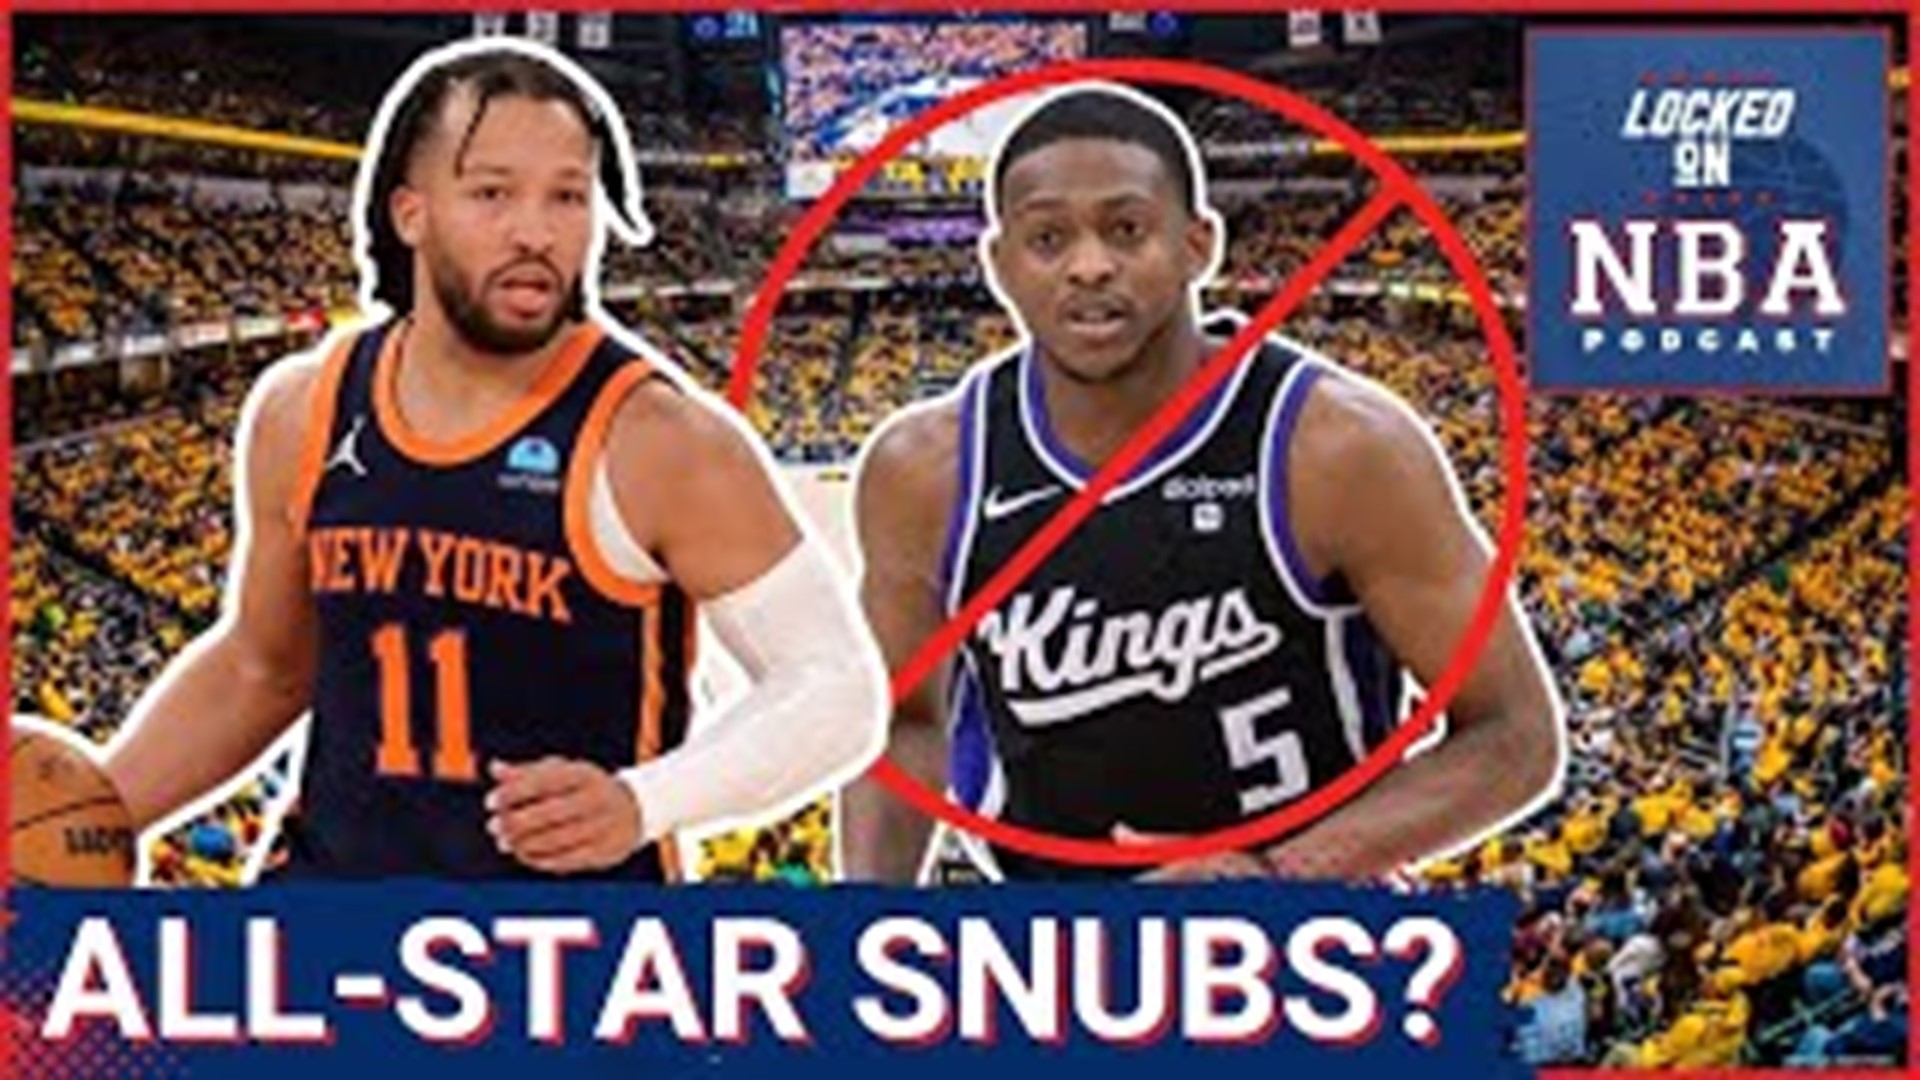 The NBA announced the All-Star reserves on Thursday, but did they get the teams right? And who is the biggest snub?